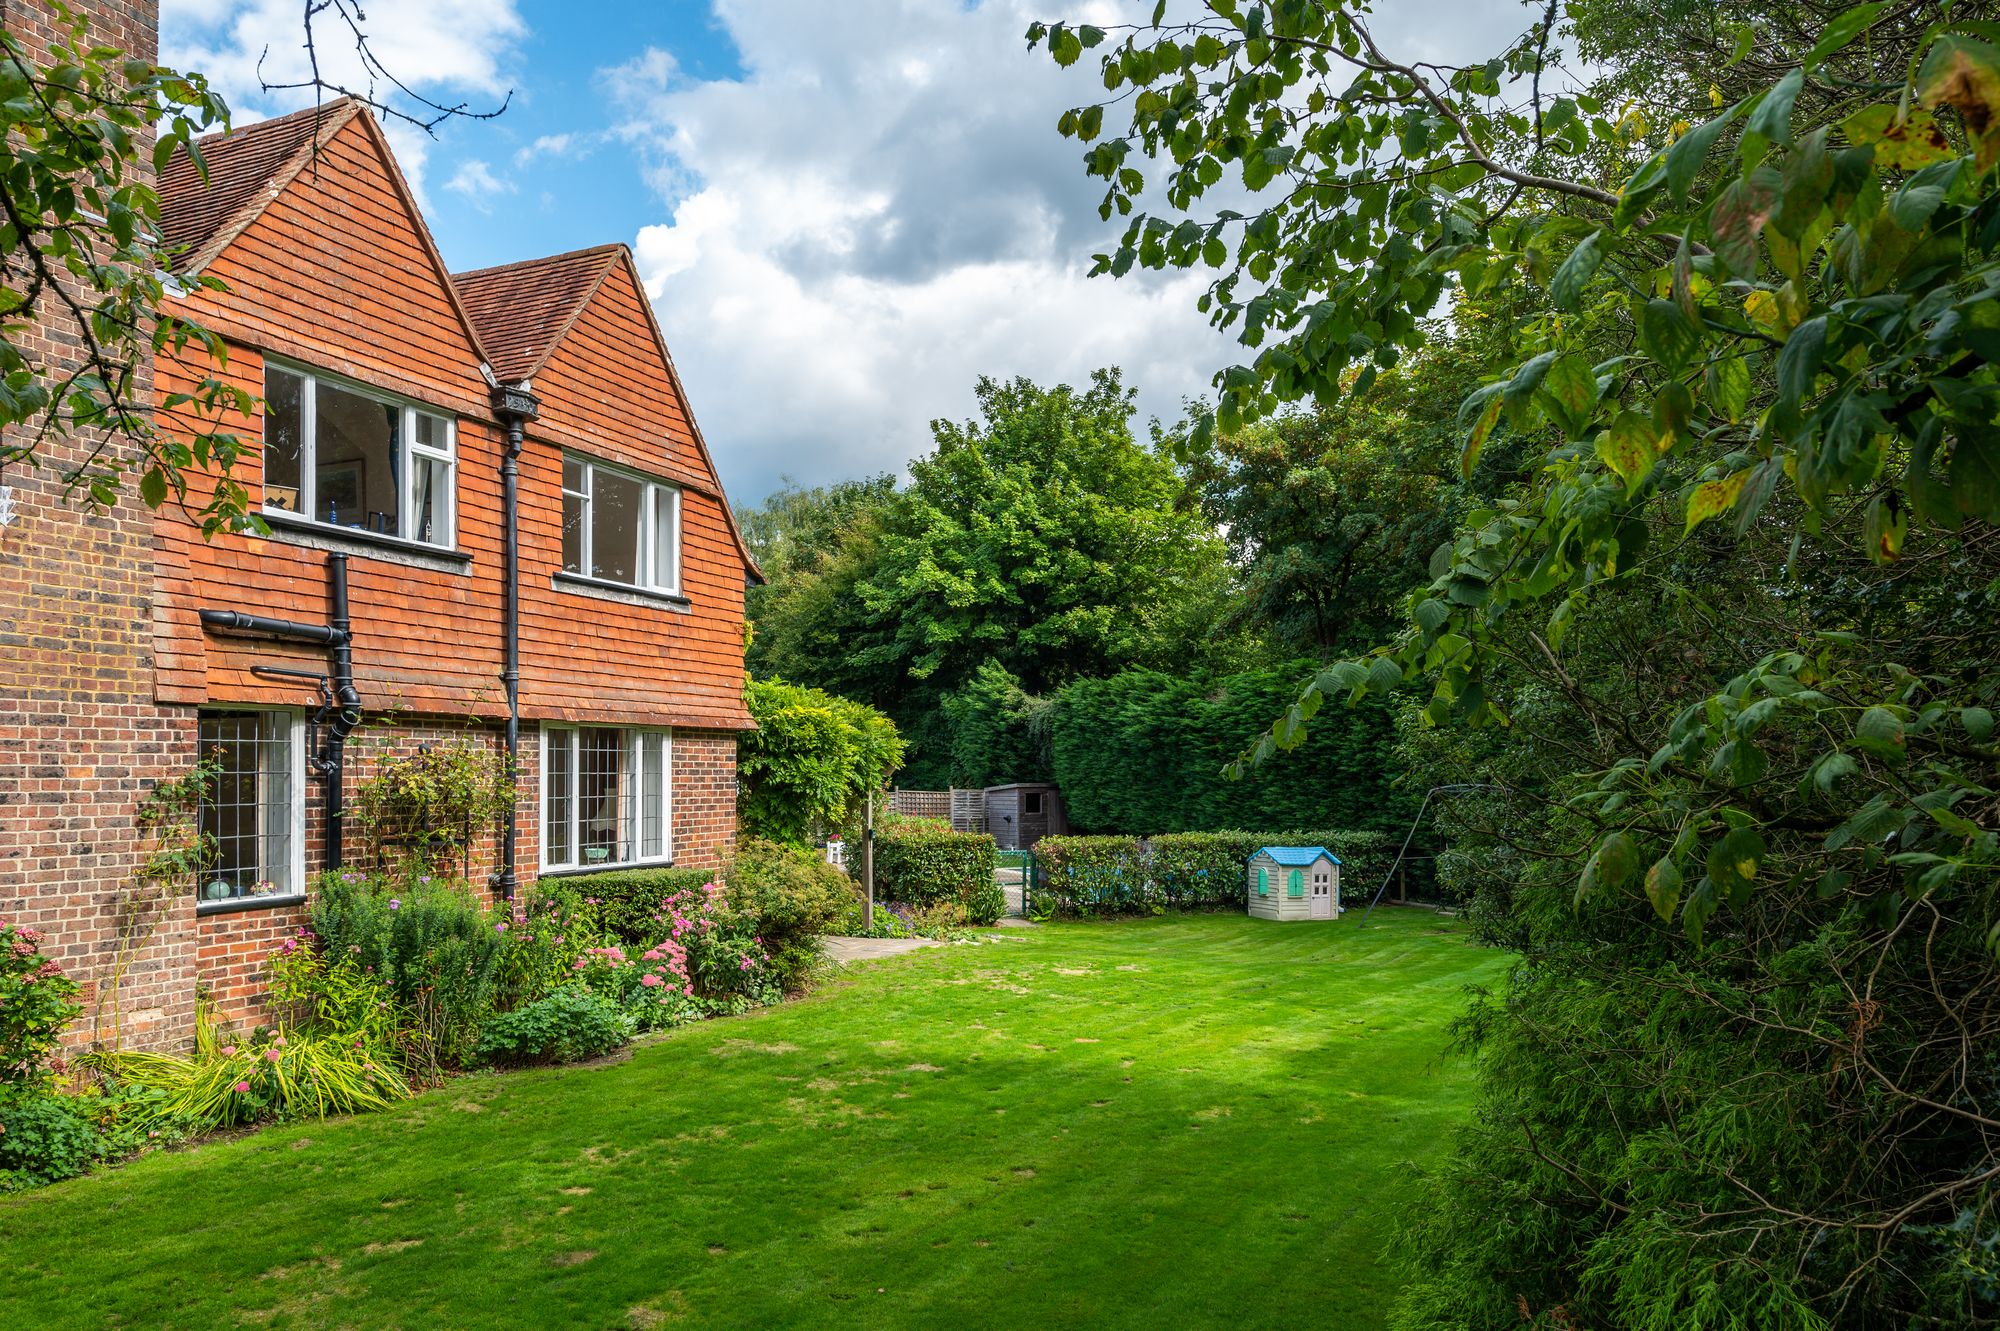 Tanners Lane, Haslemere, GU27